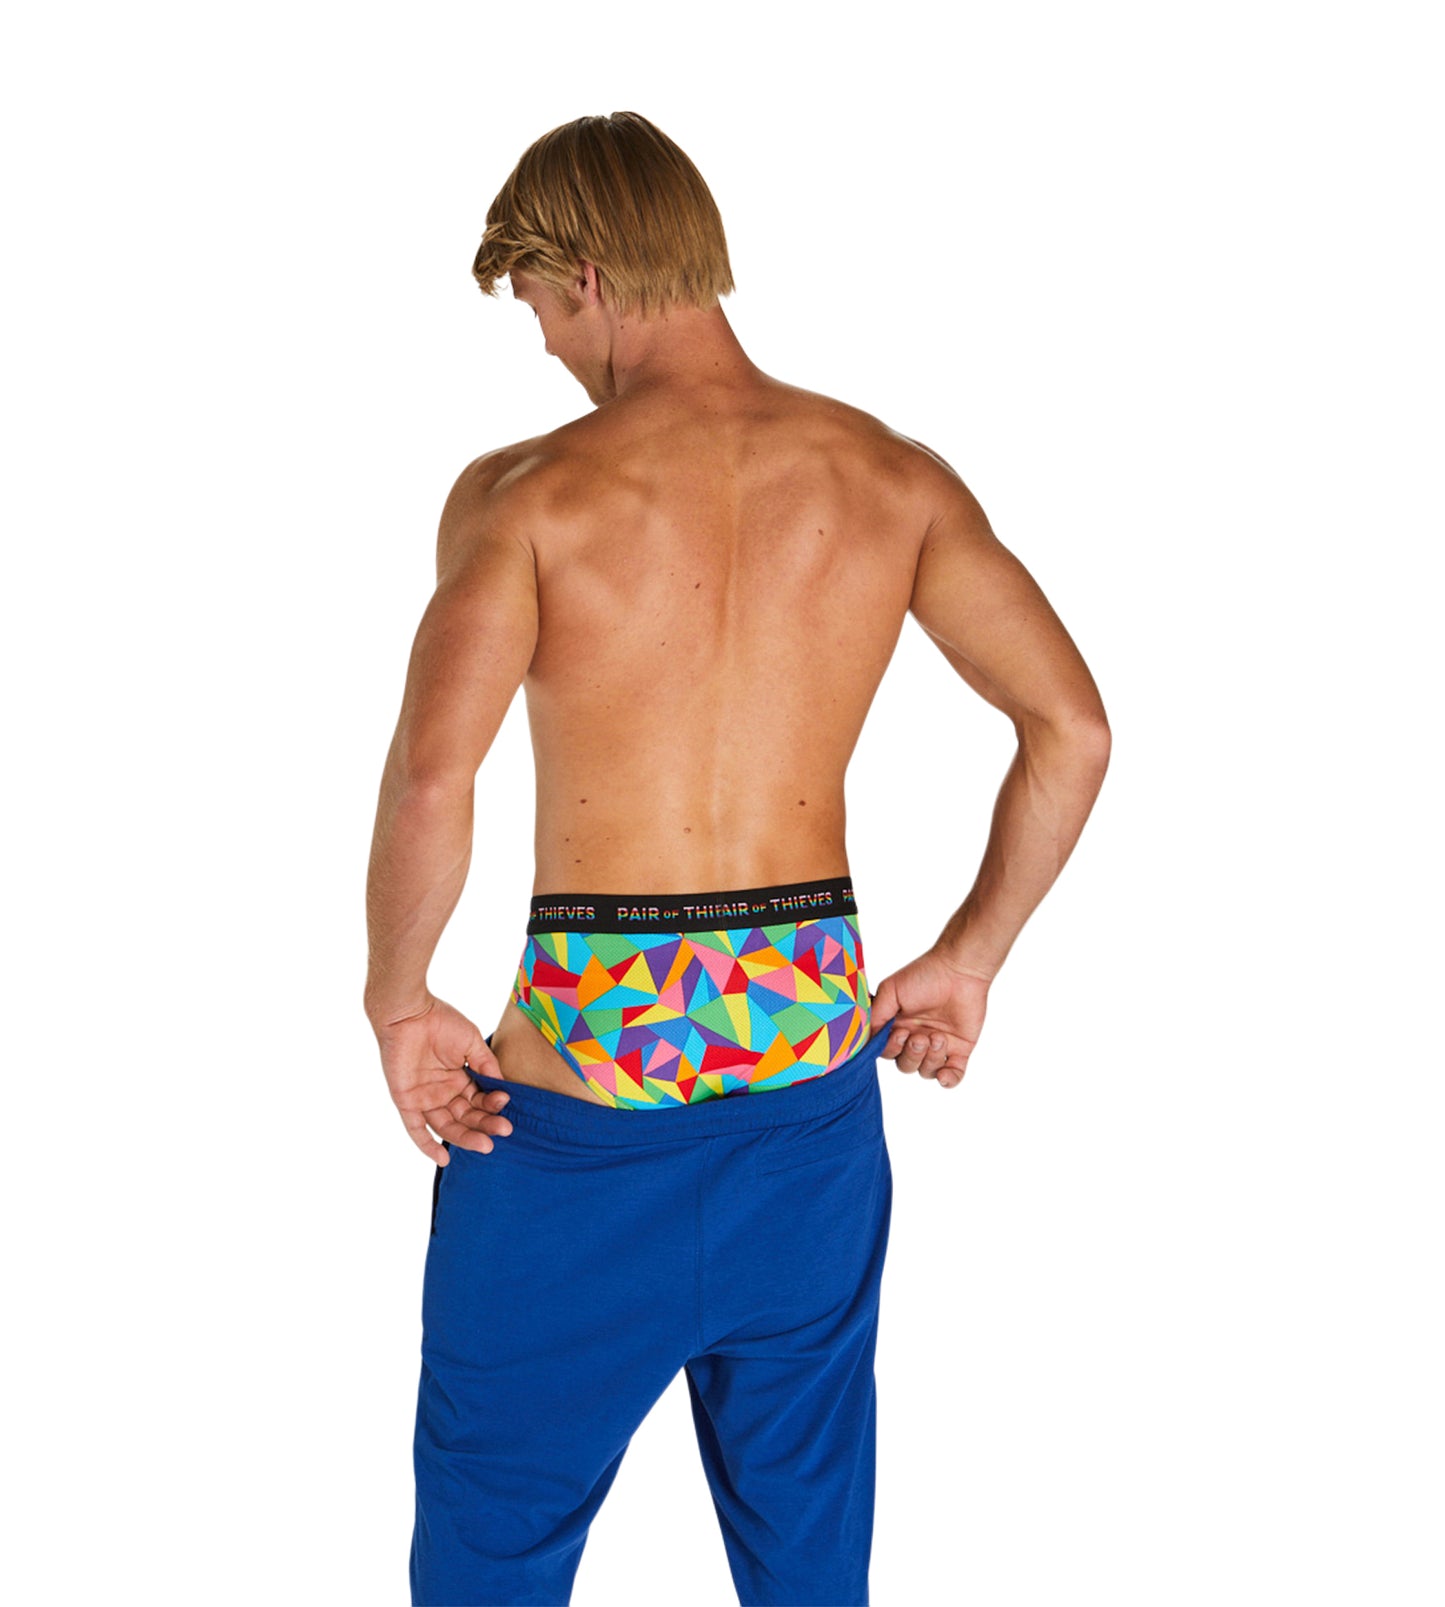 Pair of Thieves Men's Rainbow Abstract PrintSuper Fit Jockstrap Size Small